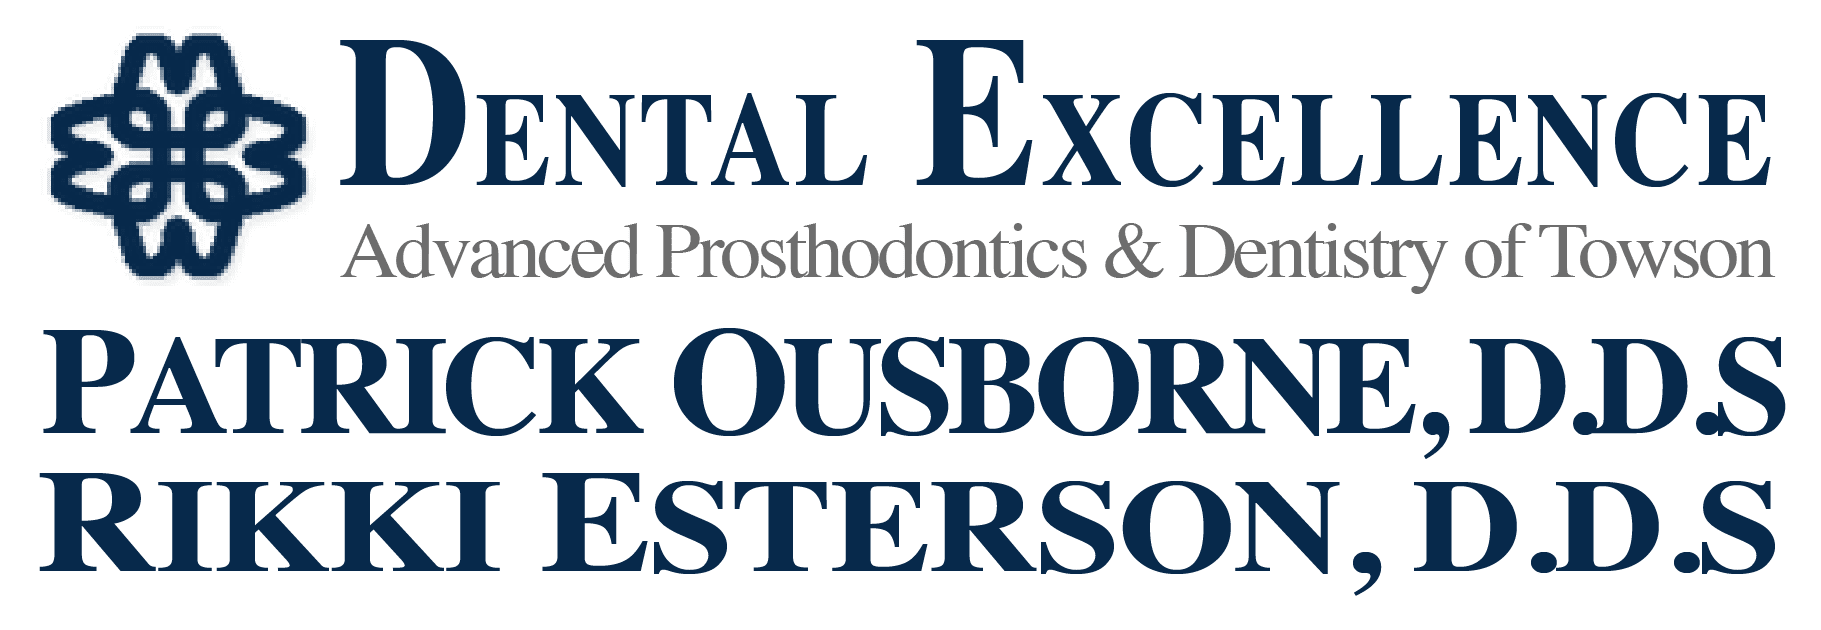 Dental Excellence: Advanced Prosthodontics & Dentistry of Towson